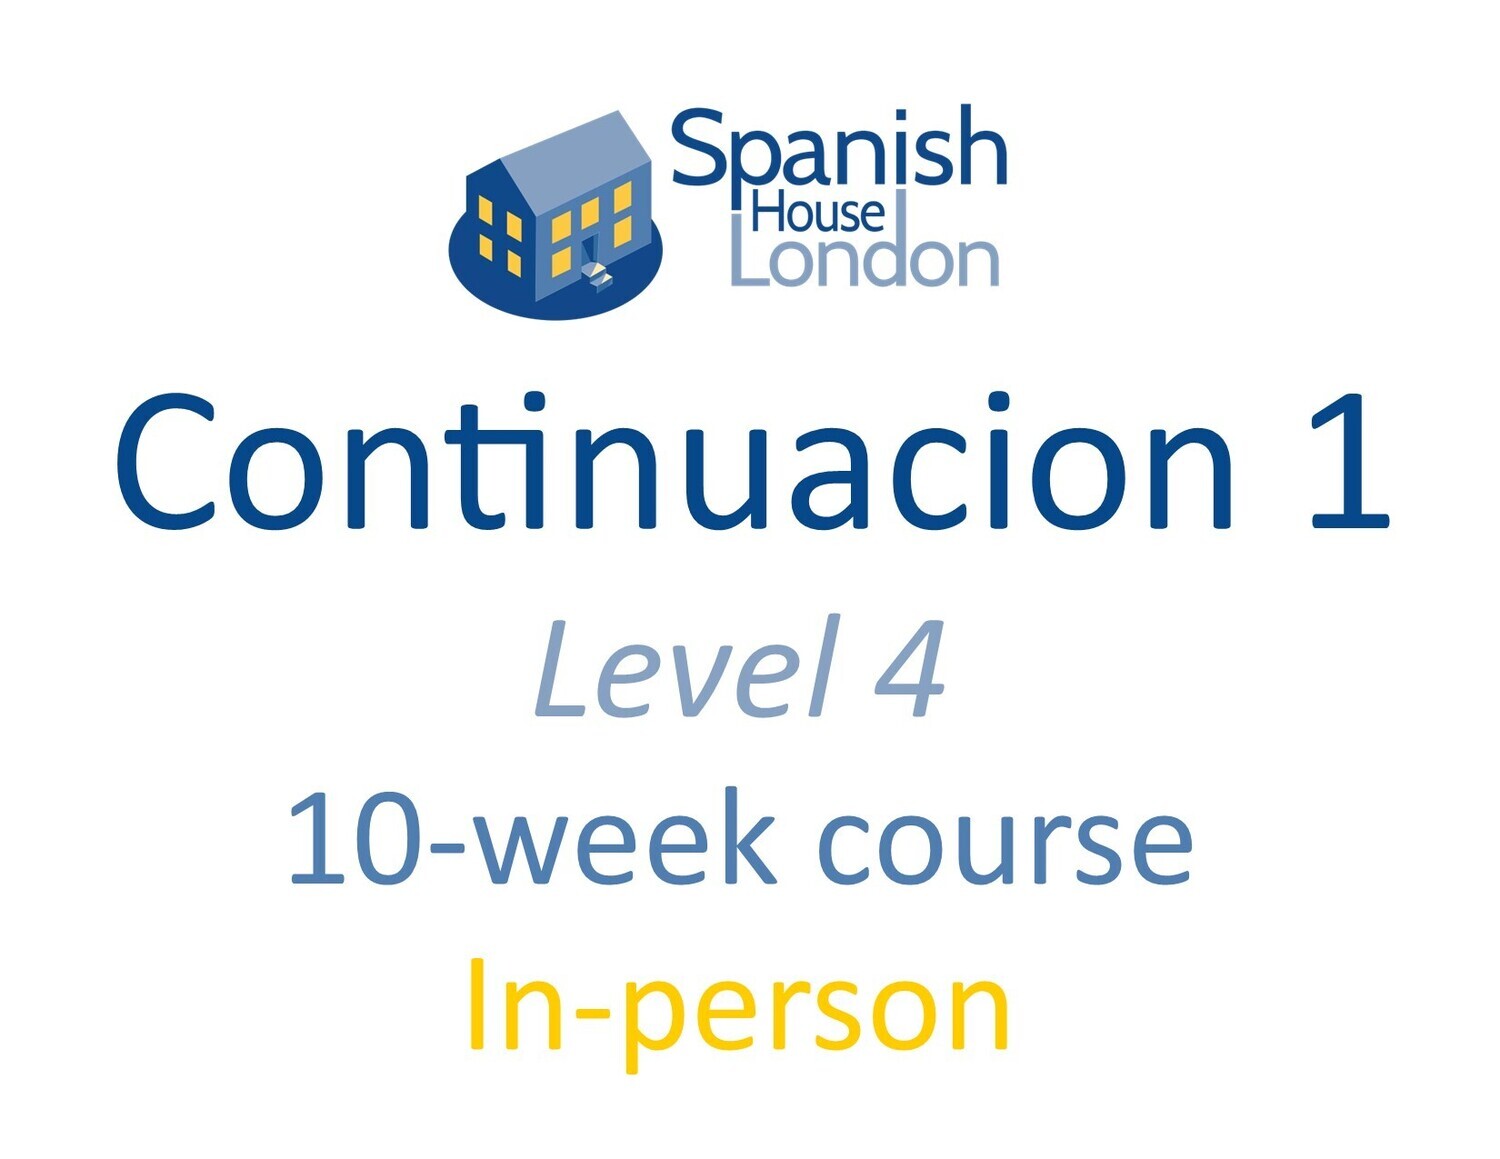 Continuacion 1 Course starting on 10th October at 6pm in Clapham North